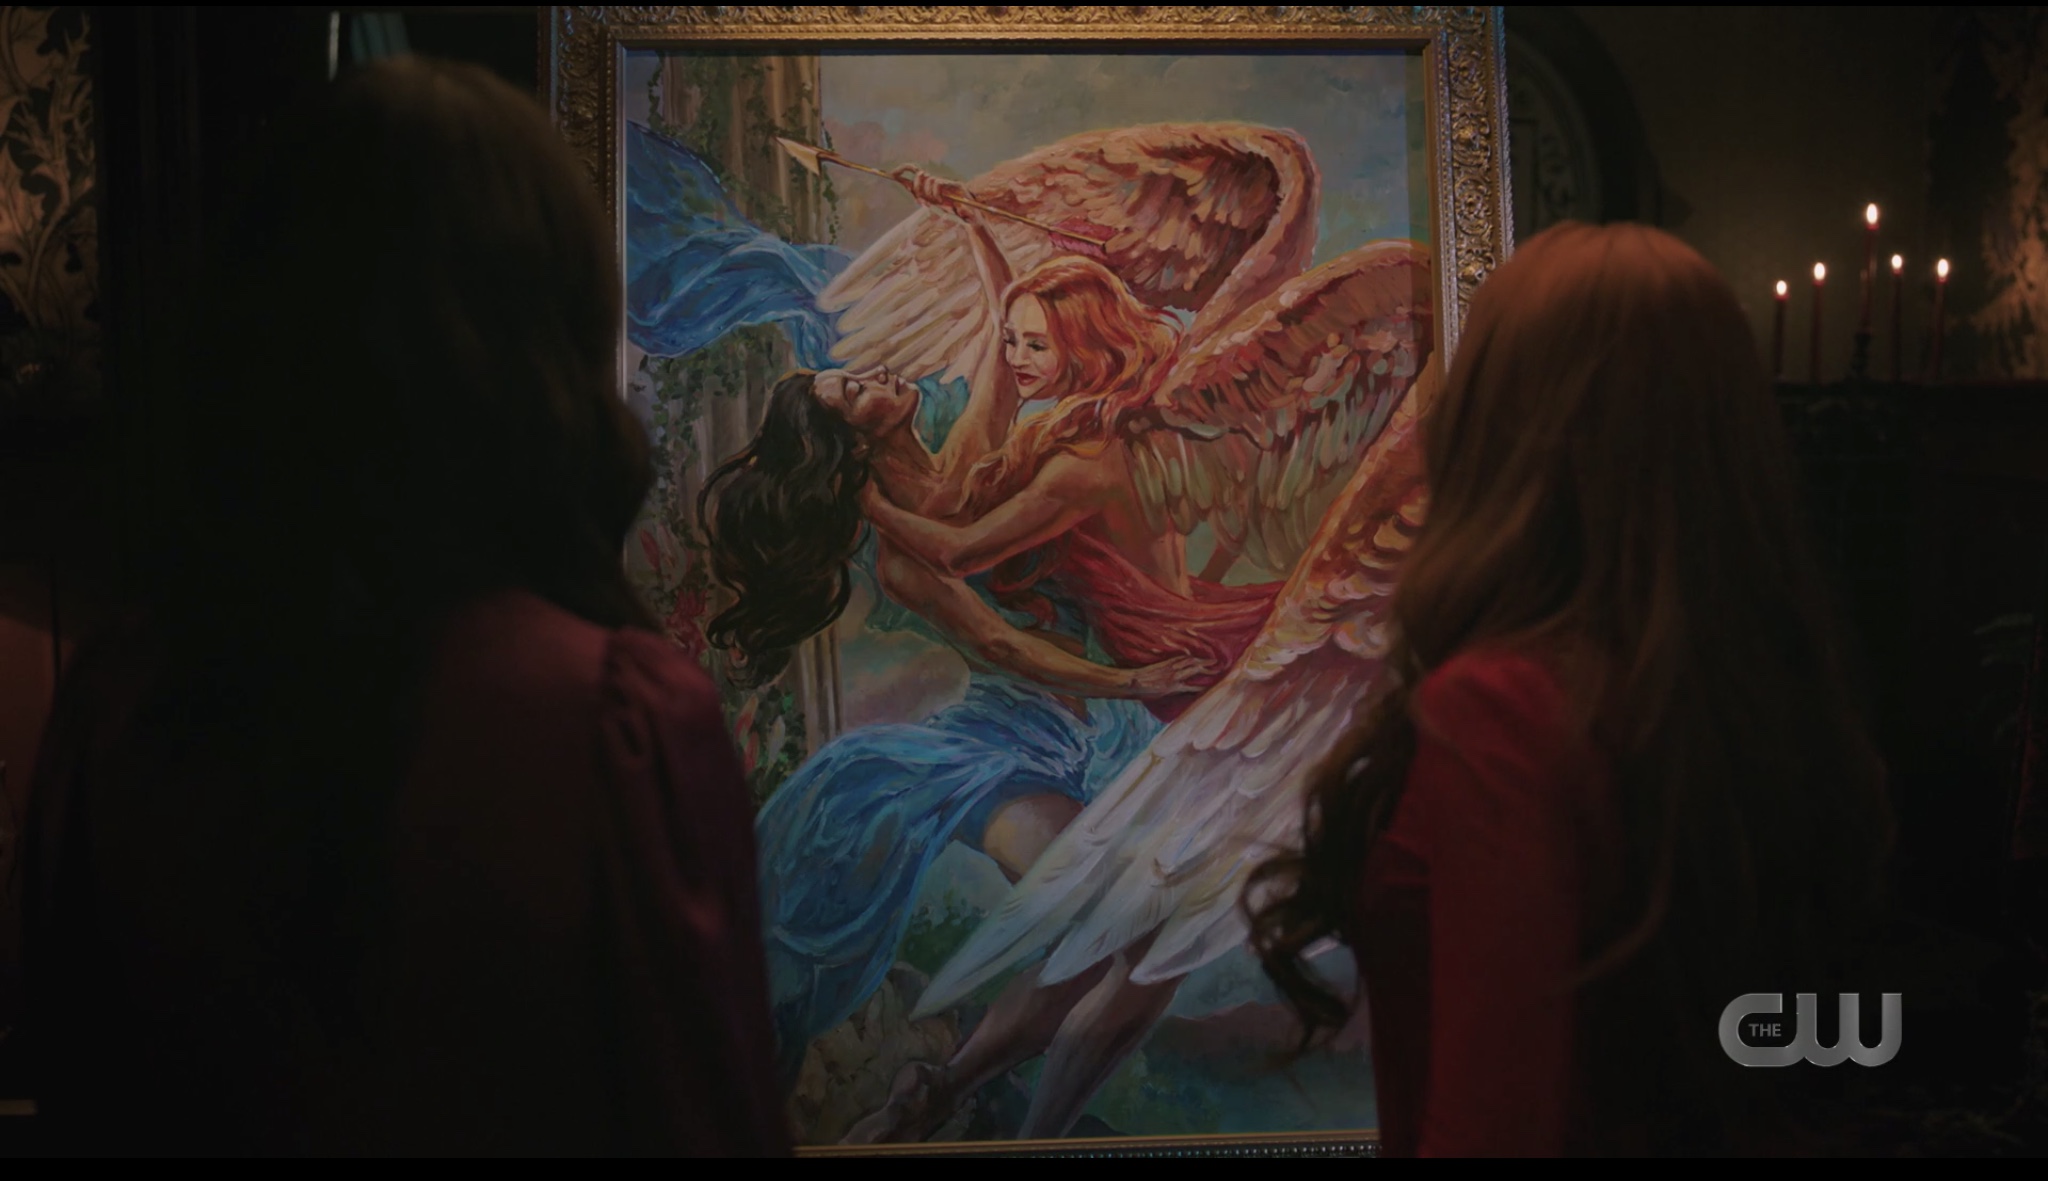 Cheryl Blossom's painting of Psyche and Cupid